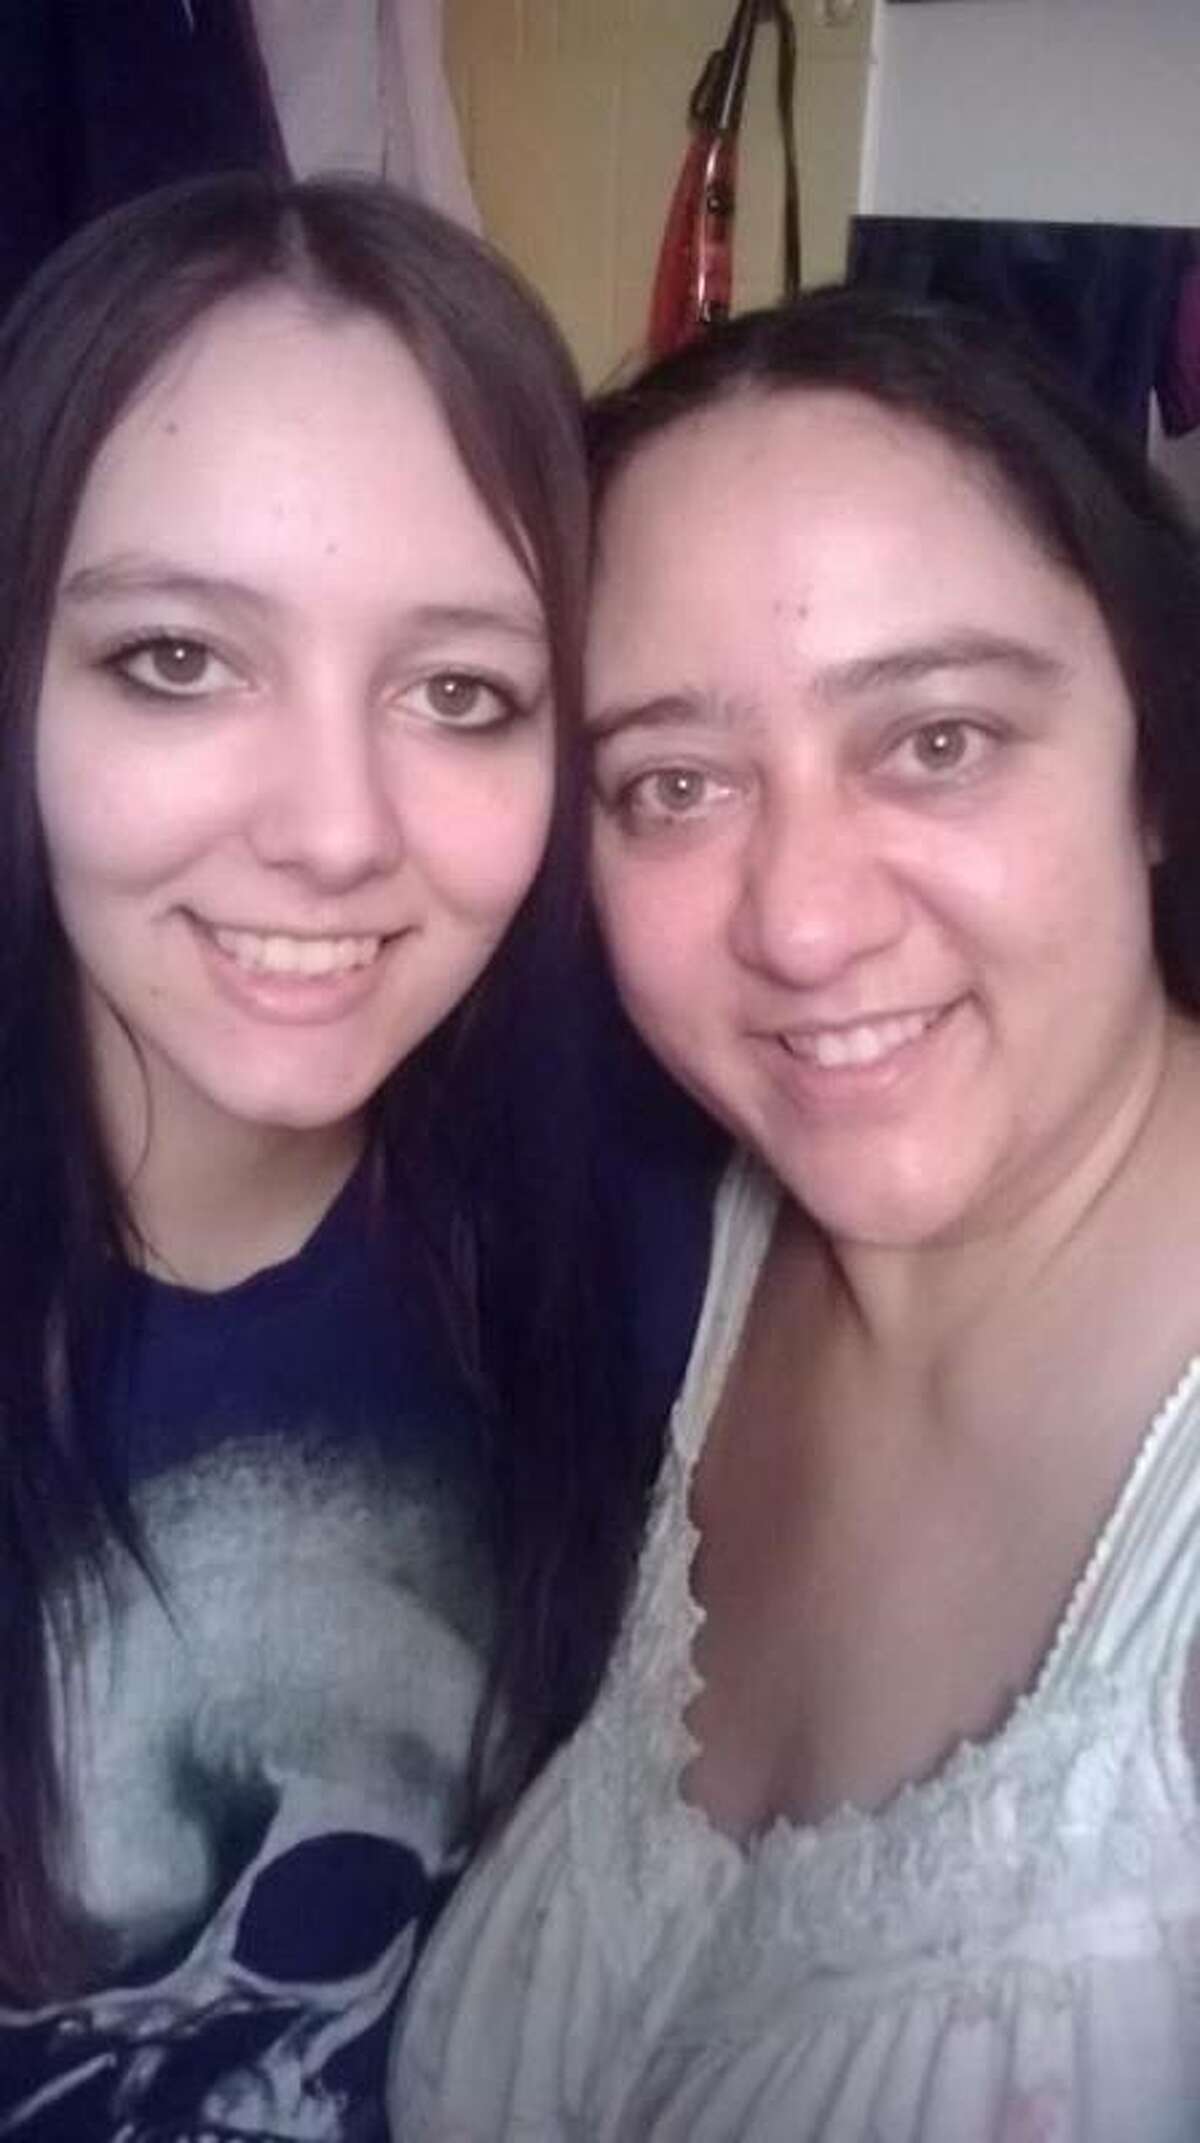 A photo of Tiffany, left, and her mother Brenda VanAlstyne. Both took care of Brenda's two nieces and nephew in 2014, before Tiffany was accused of killing her 5-year-old cousin Kenneth White. (Facebook with permission from Brenda VanAlstyne)